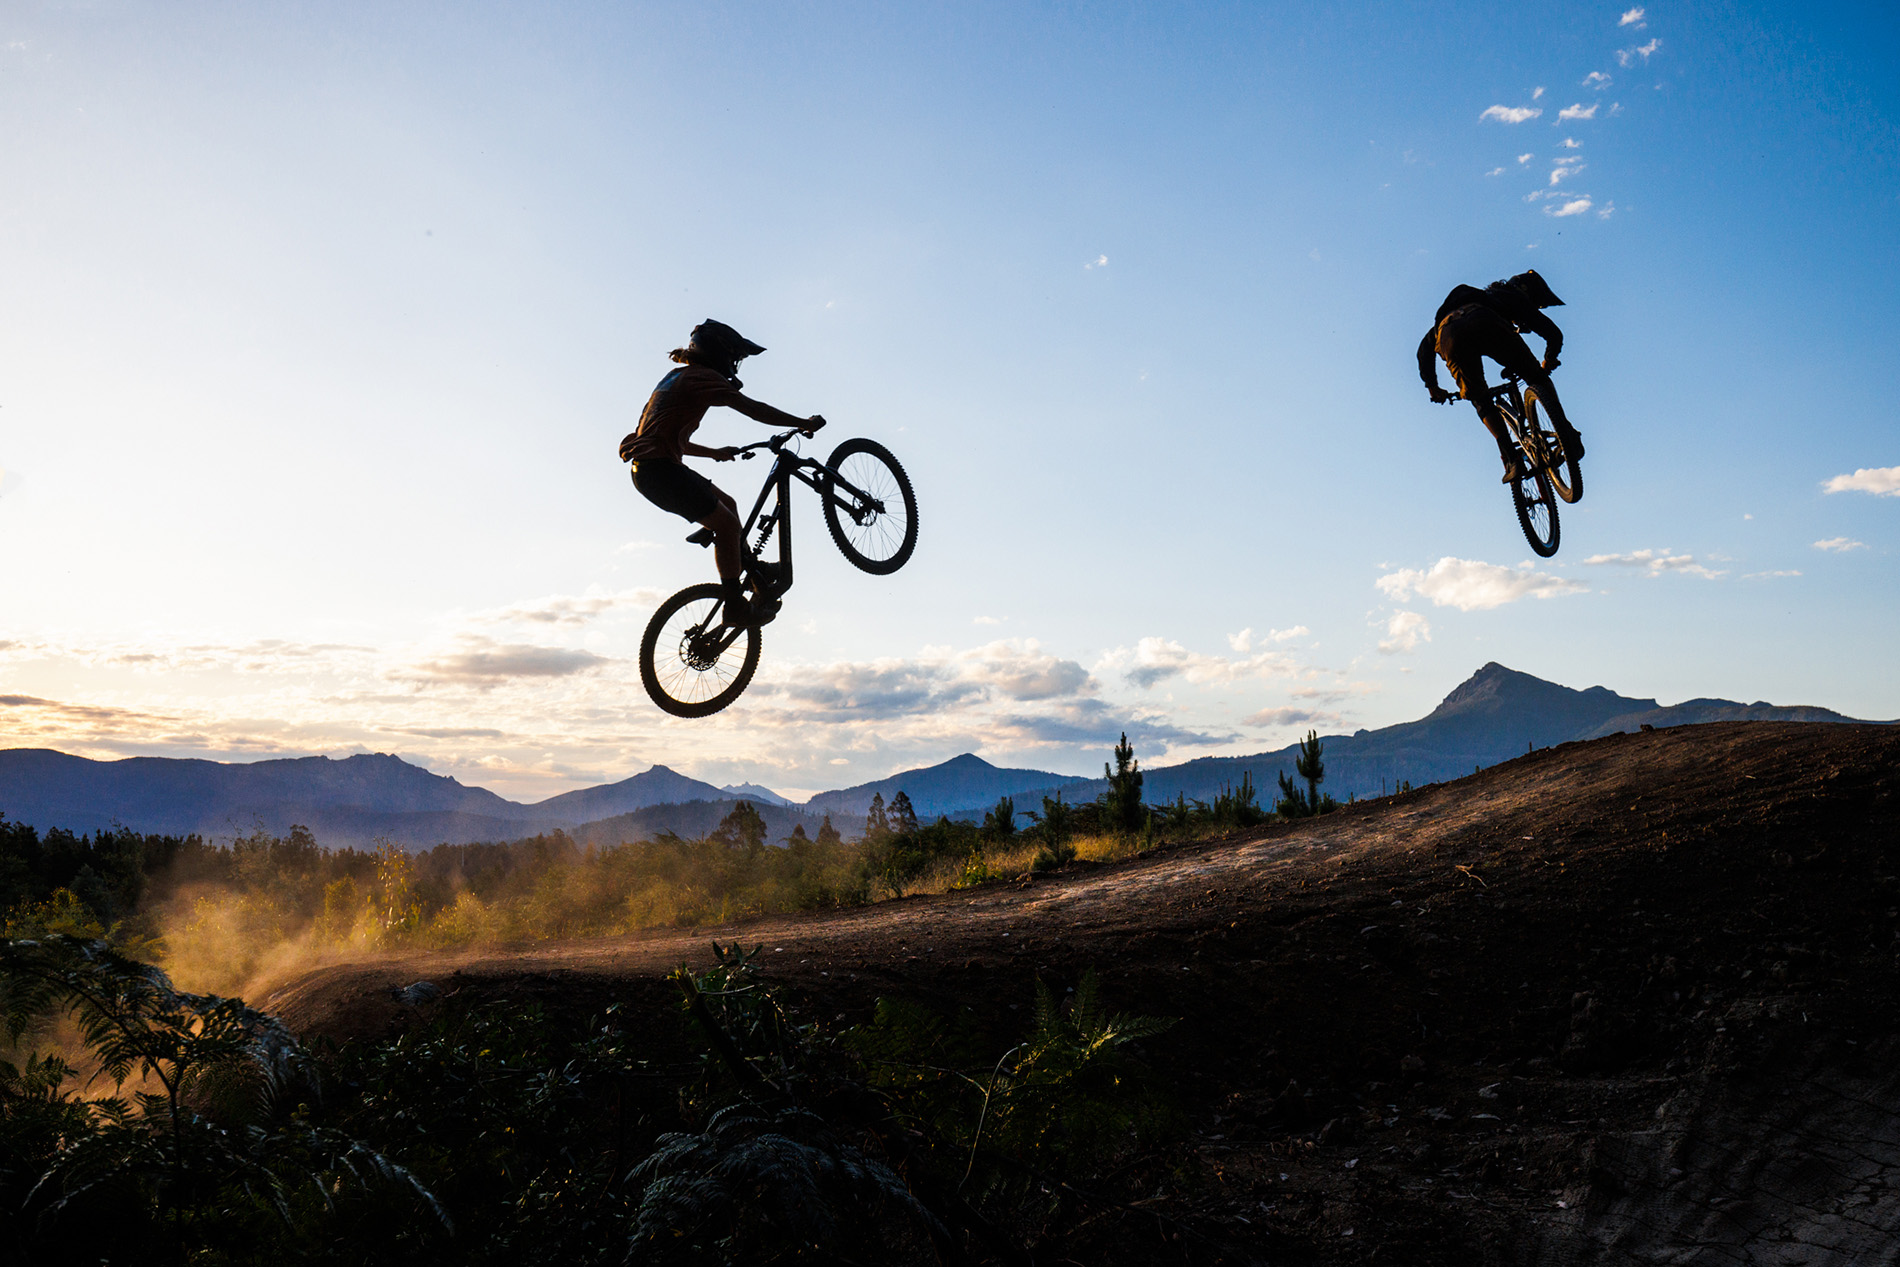 The Complete Maydena Bike Park Holiday Guide: Tips, Trails, Passes & More!